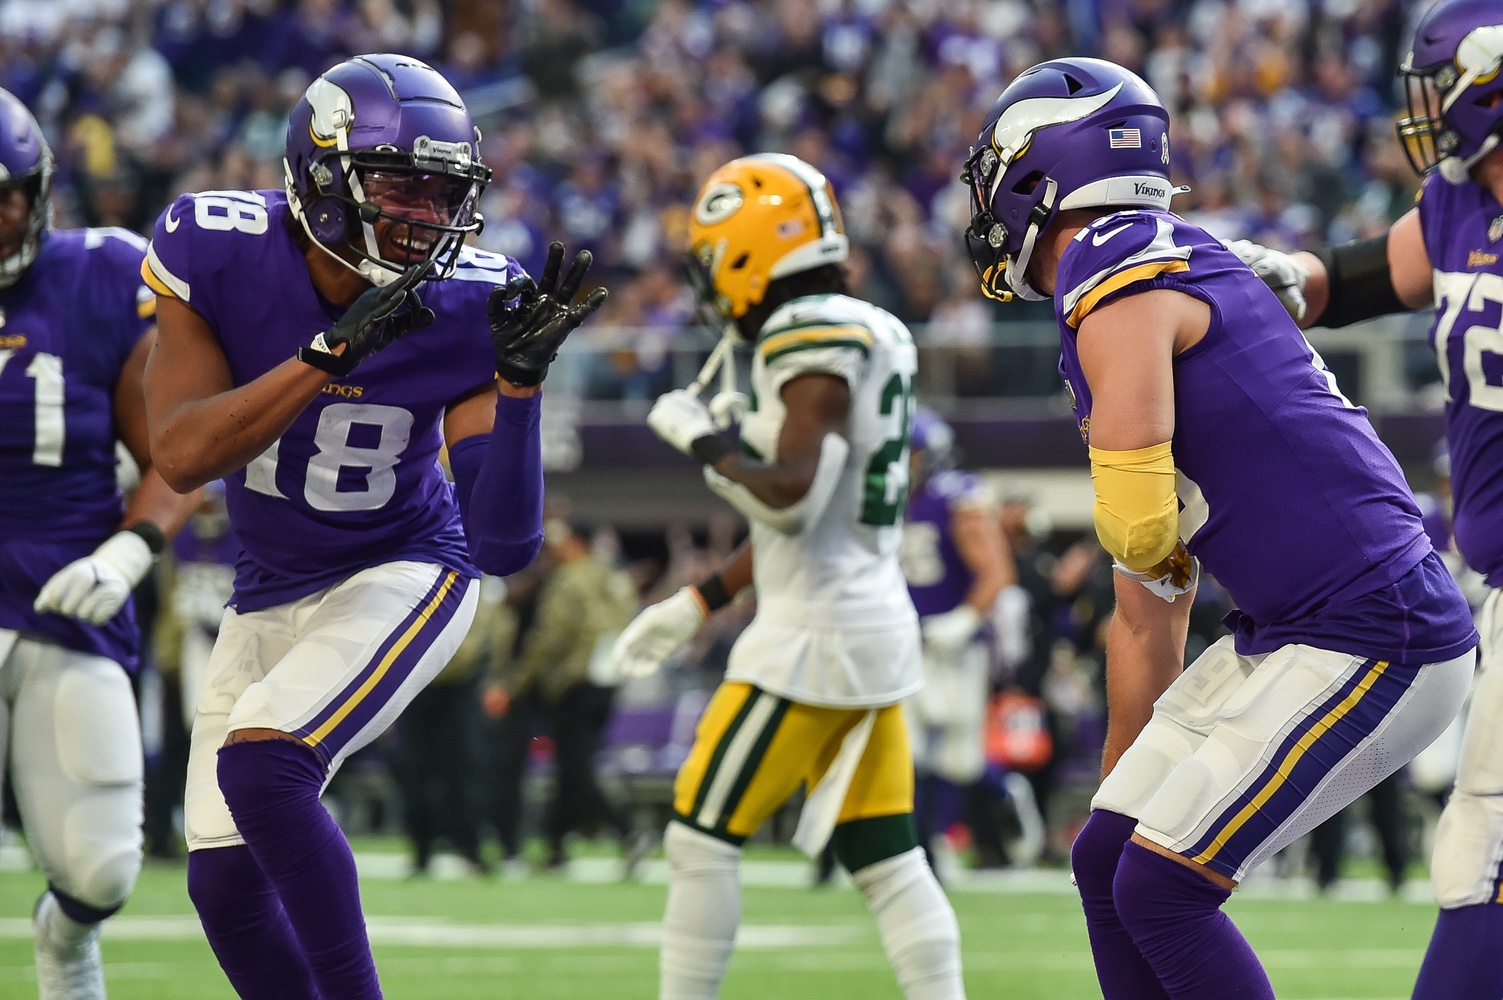 Vikings Communications on X: .@JJettas2 has reached 100 receptions in  2021, making him the 5th player in team history to have at least 100  catches in a single season. - Cris Carter (